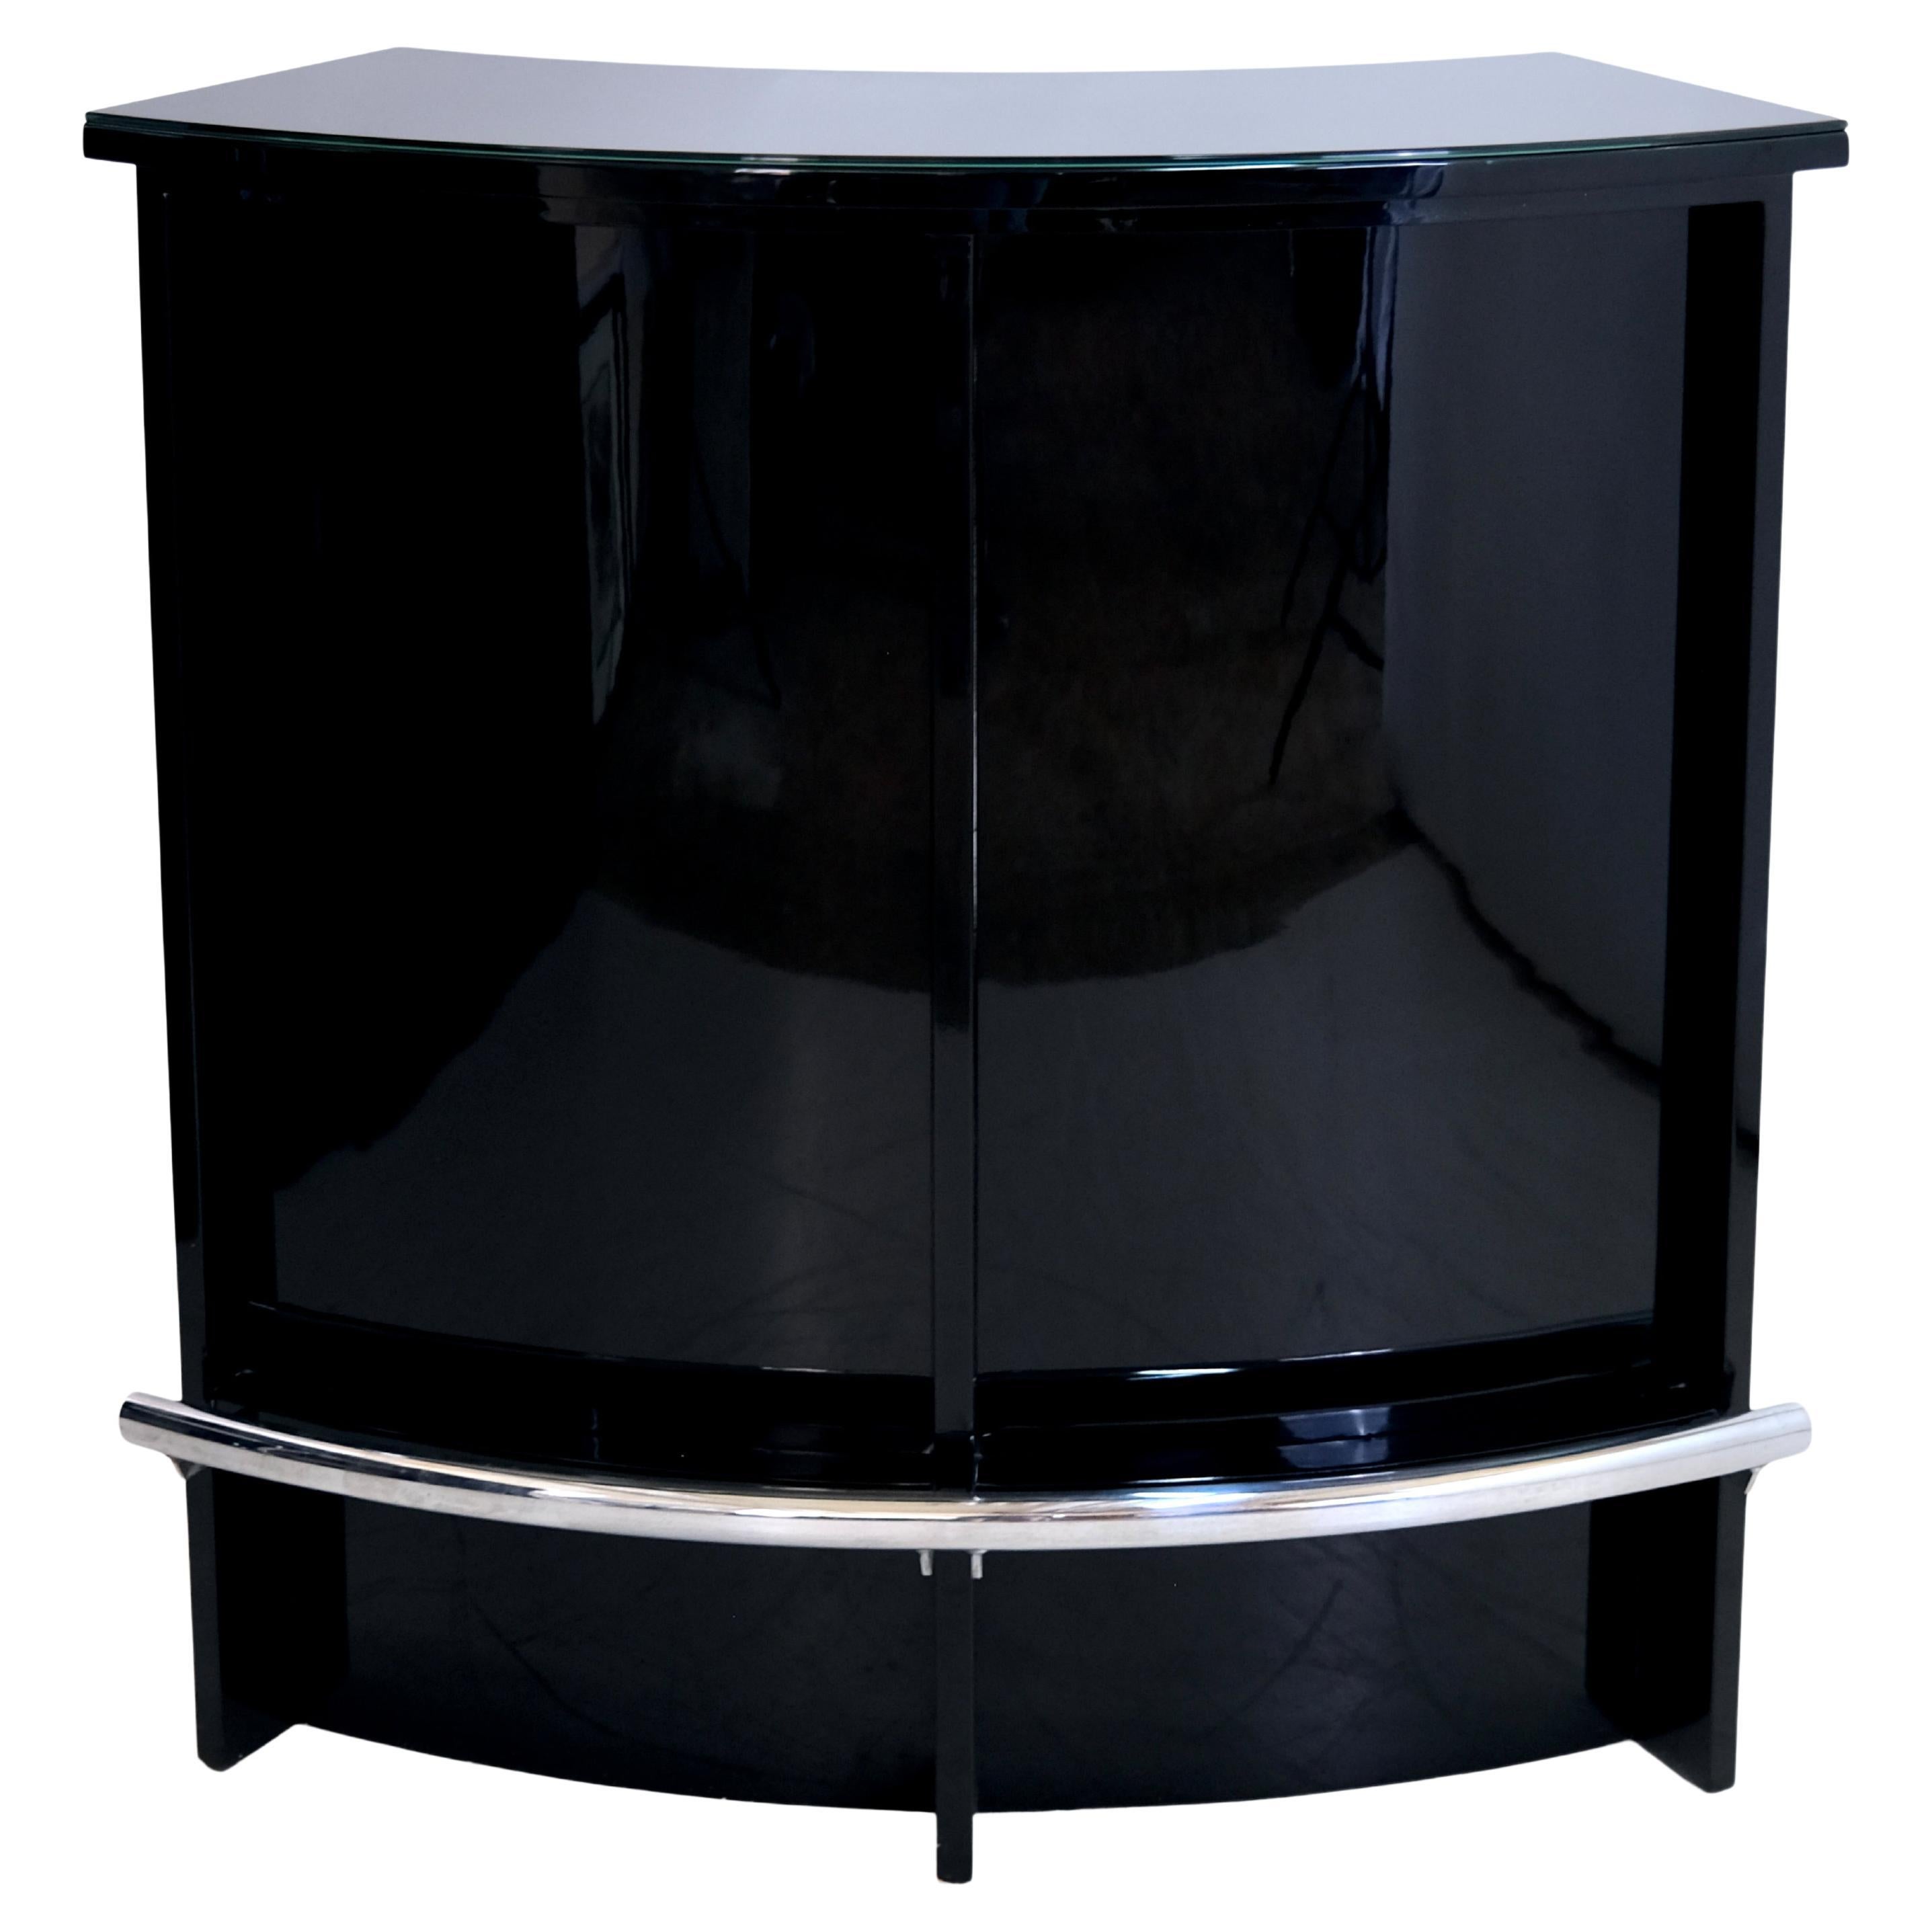 1930s Semicircular French Art Deco Bar Counter in Black Lacquer